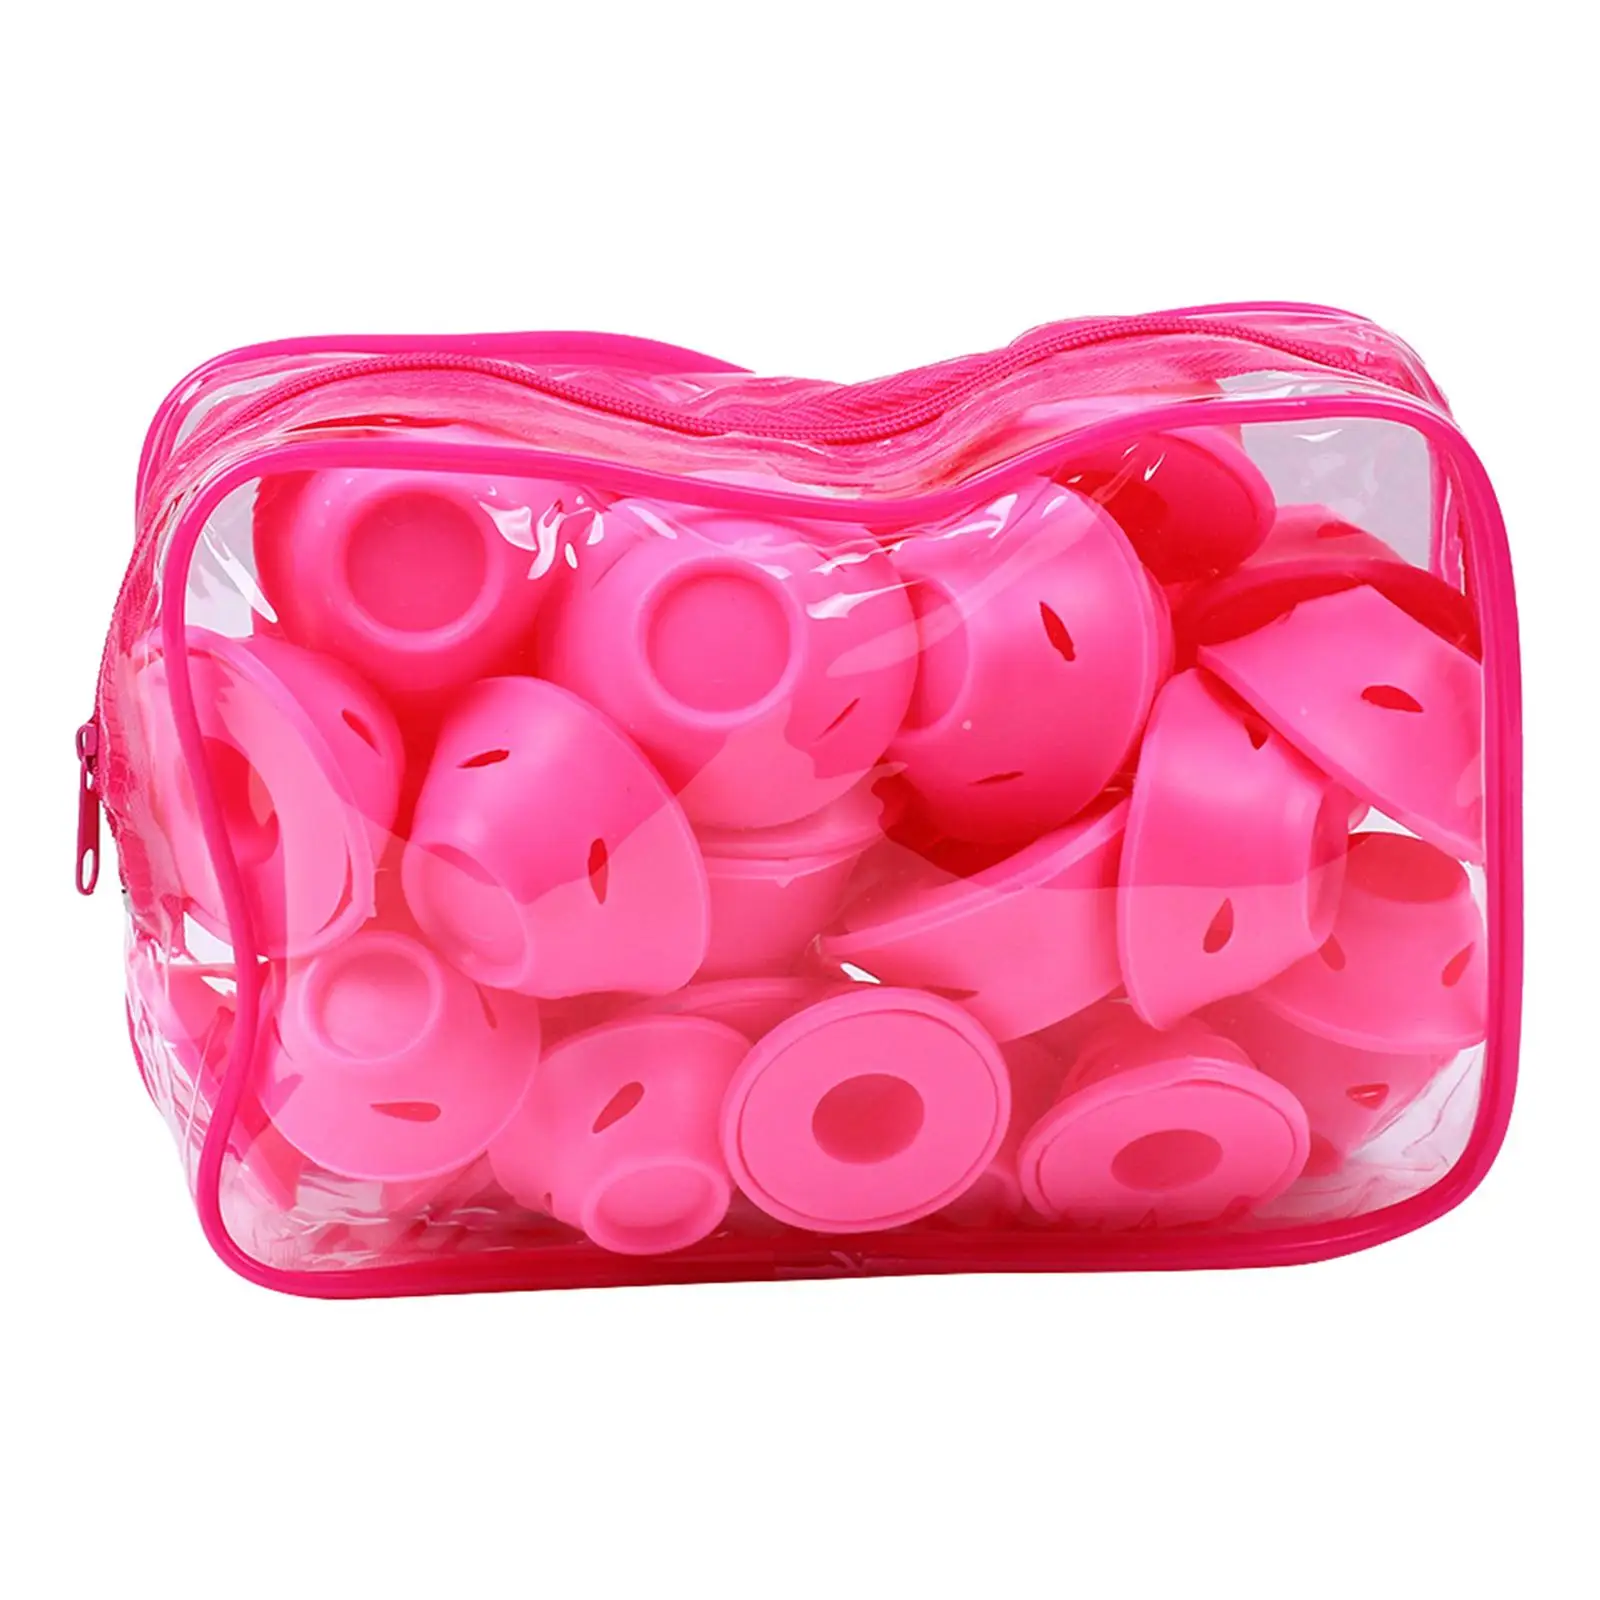 30Pieces Hair Rollers Removable Curls Tool Hair Accessories for Women Girl